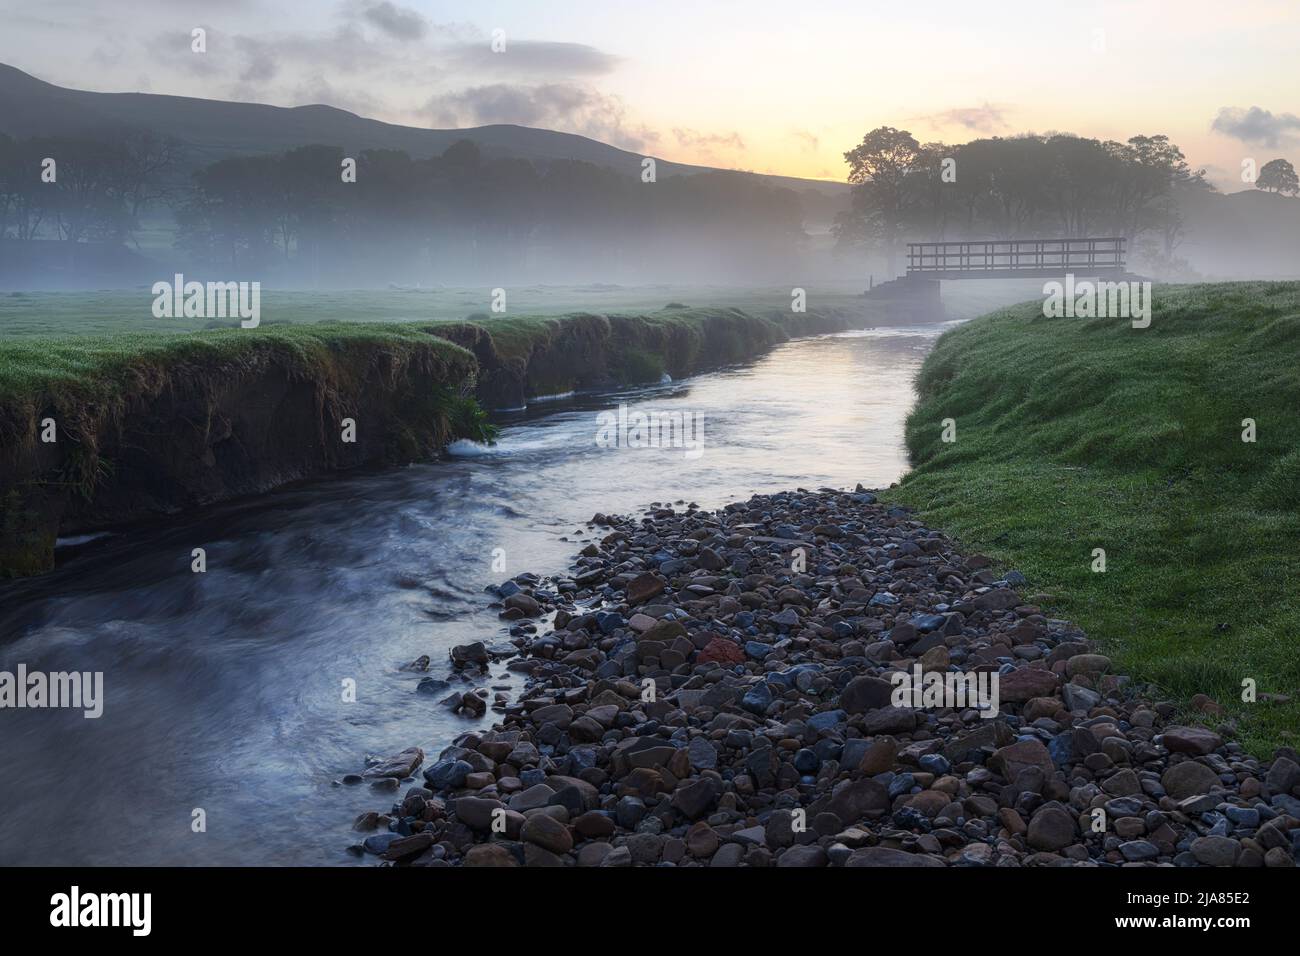 Sunrise and morning mist over Gayle Beck near the picturesque market town of Hawes in the Yorkshire Dales National Park, Yorkshire, England. Stock Photo